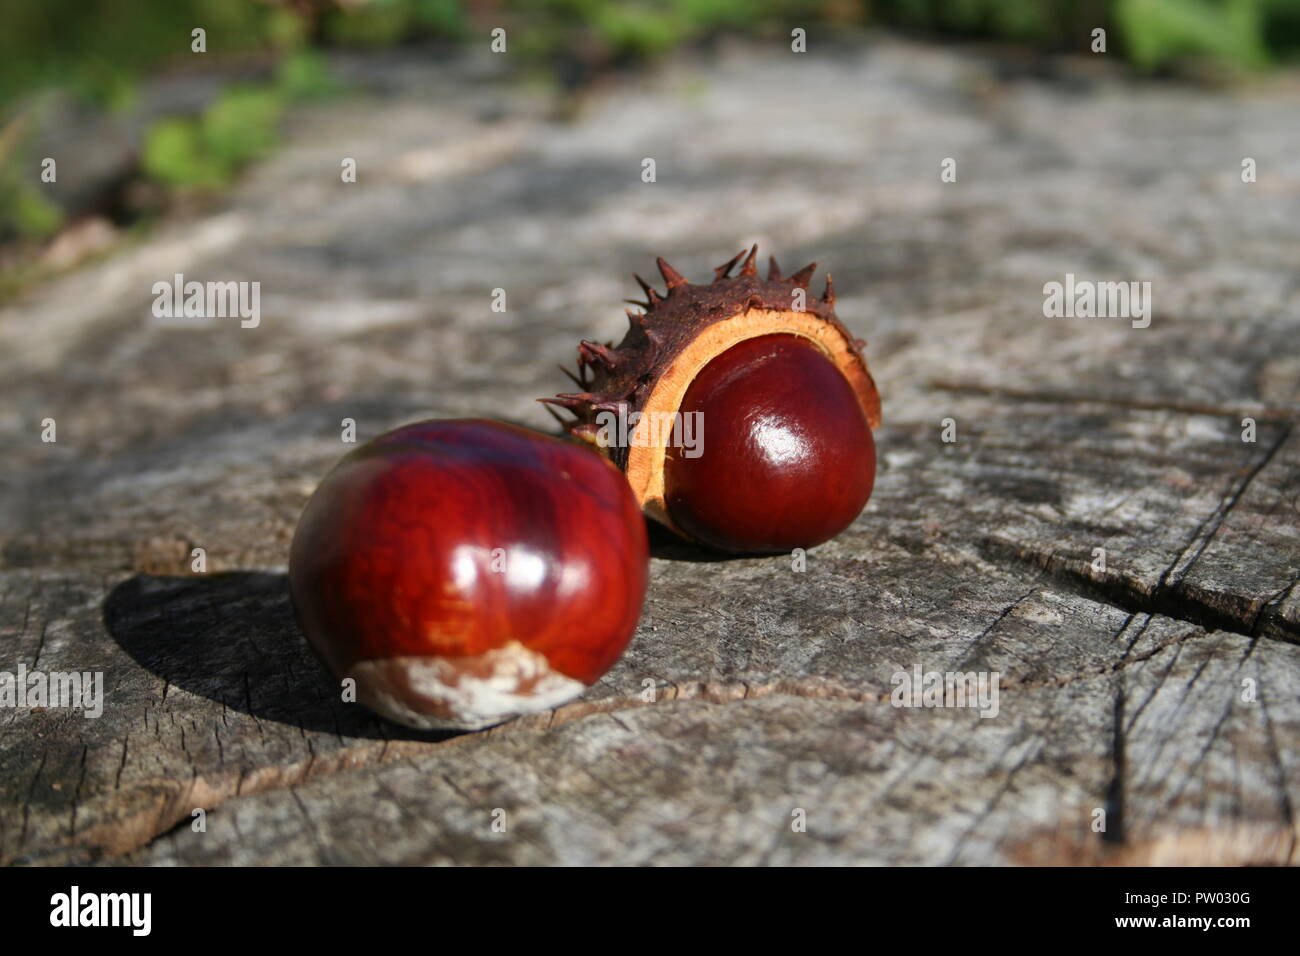 Horse chestnuts, found while walking through miskin forestry on autumn day Stock Photo